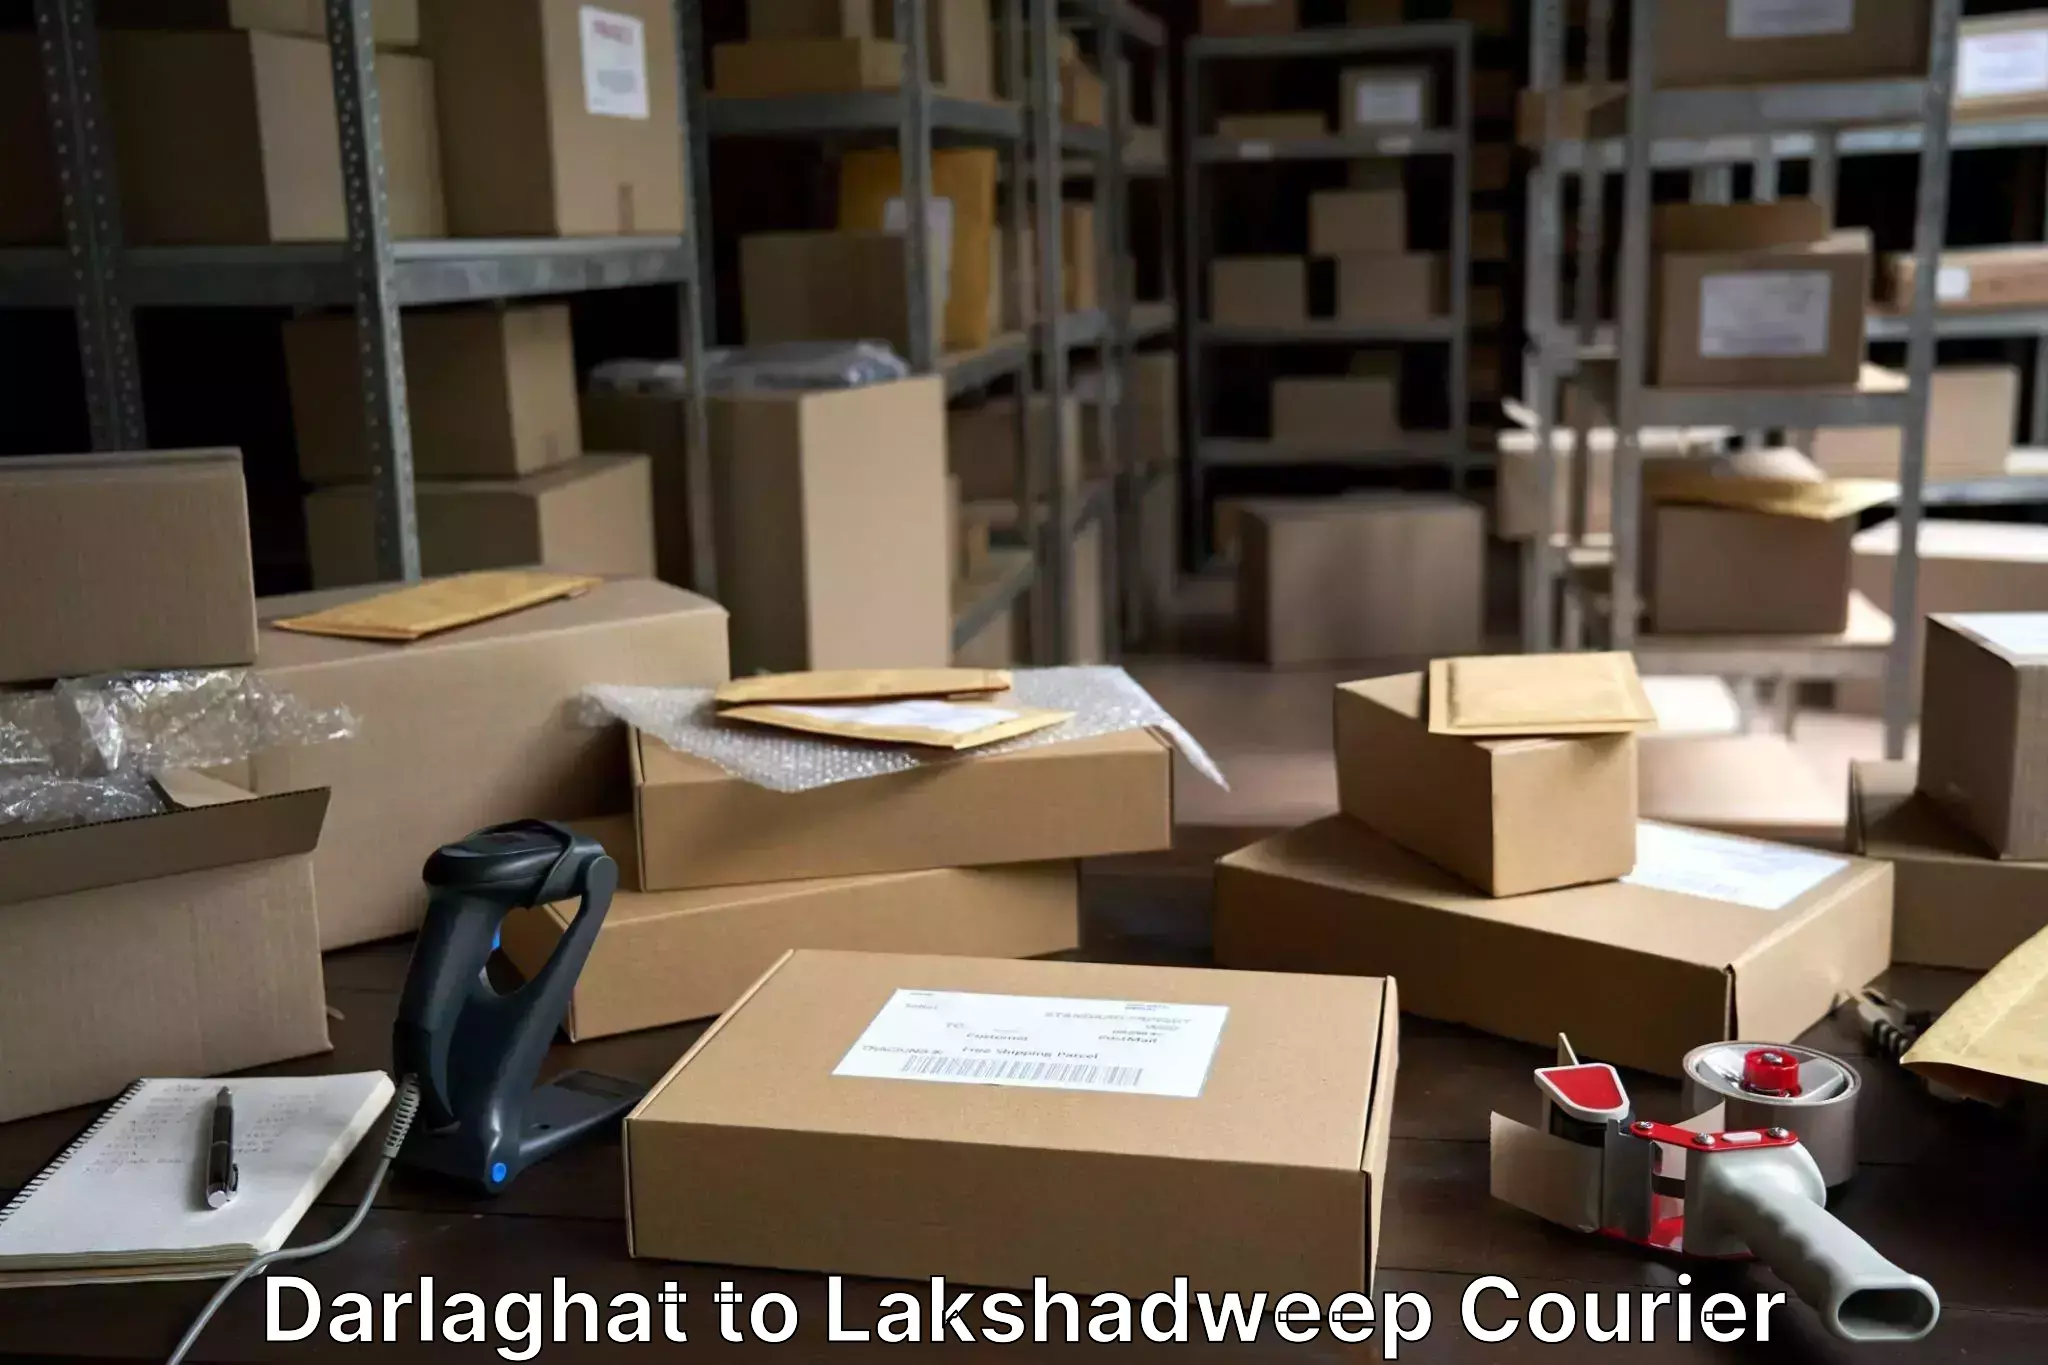 Luggage delivery network Darlaghat to Lakshadweep